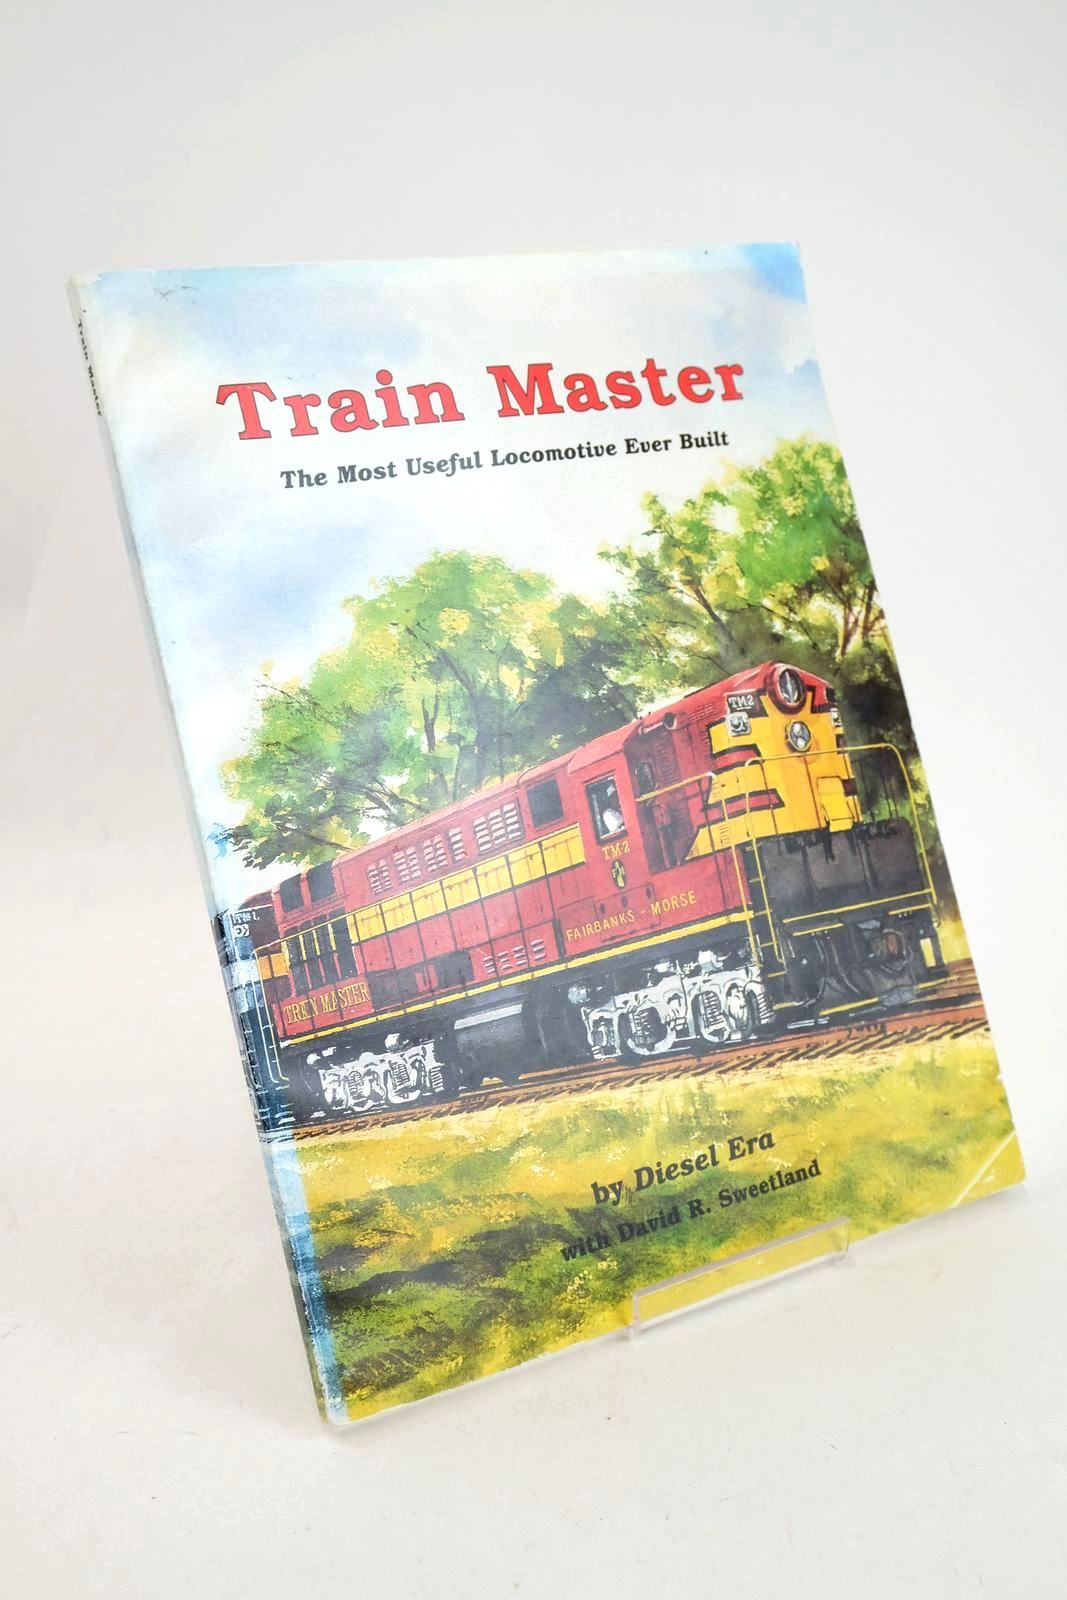 Photo of TRAIN MASTER: THE MOST USEFUL LOCOMOTIVE EVER BUILT written by Era, Diesel Sweetland, David R. published by Withers Publishing (STOCK CODE: 1327639)  for sale by Stella & Rose's Books